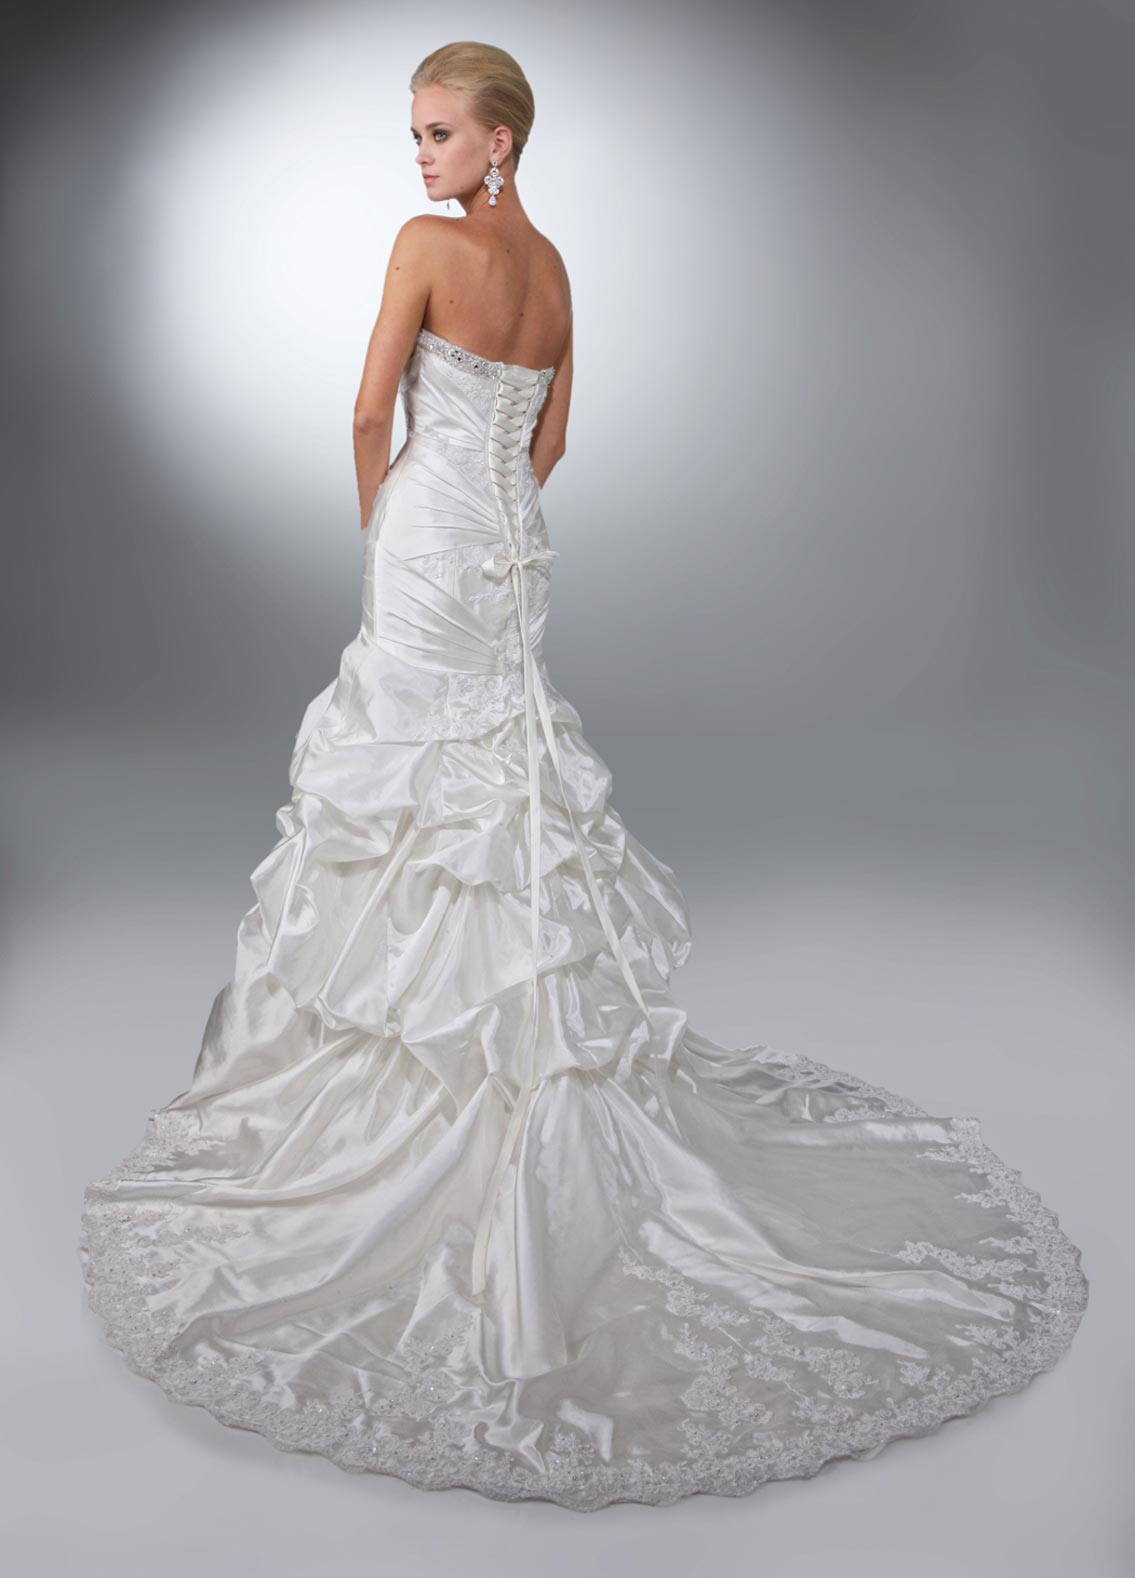 DaVinci Bridal 50084 Available in Size 10 Ivory strapless mermaid wedding dress  Taffeta fit and flare gown with a strapless neckline trimmed with beading. Lace applique on the bodice is wrapped with pleated taffeta. Pick ups at top of the skirt and a lace hem on the bottom skirt with a lace up back. 